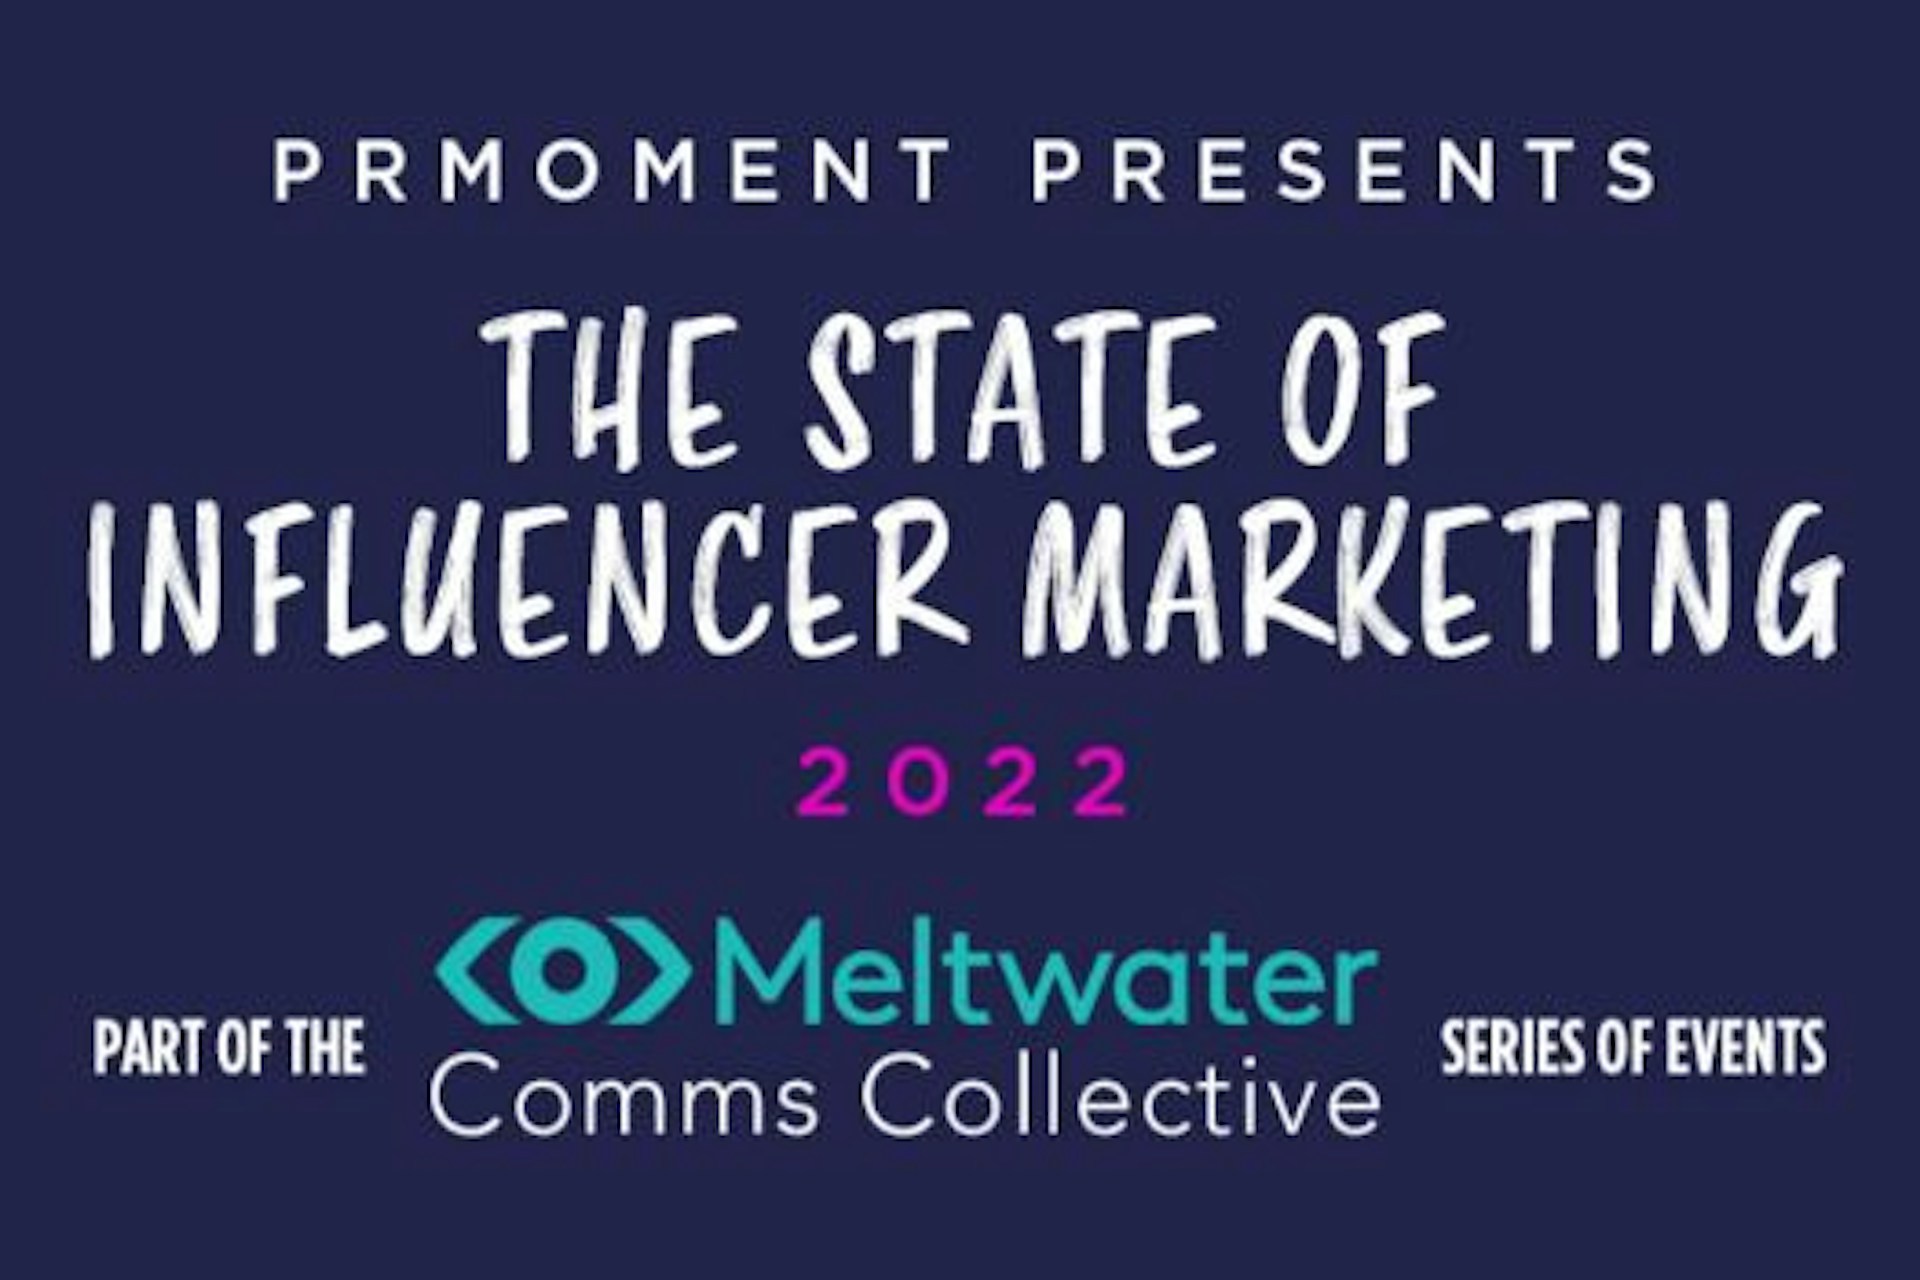 PRMoment presents the state of influencer marketing 2022